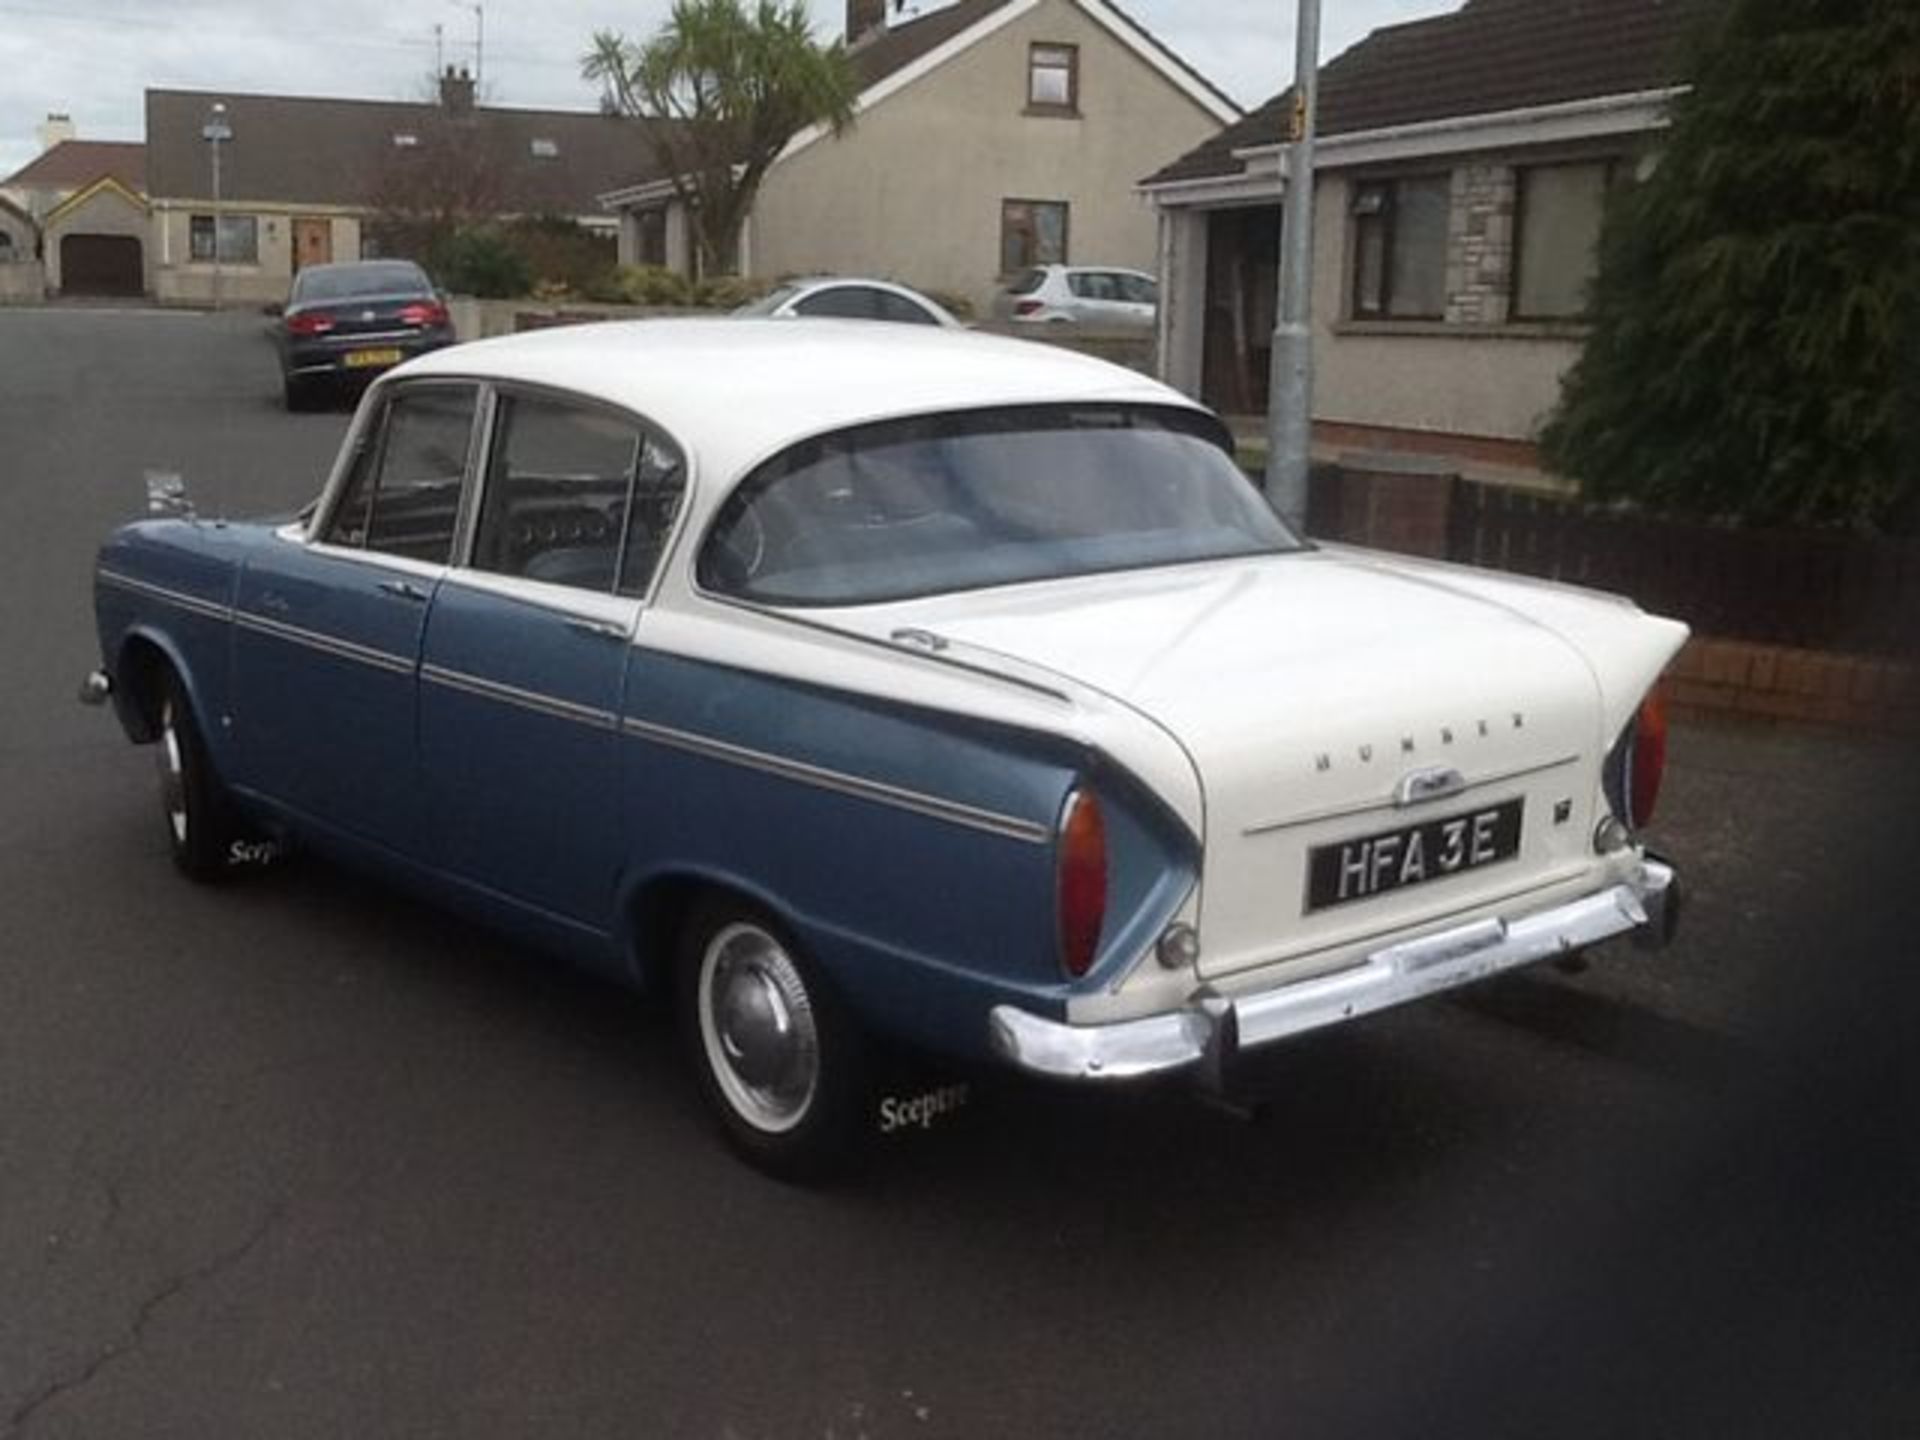 HUMBER, SCEPTRE MKII - 1725cc, Chassis number B1320056320DHS0 - this is a Mark II example which - Image 12 of 18